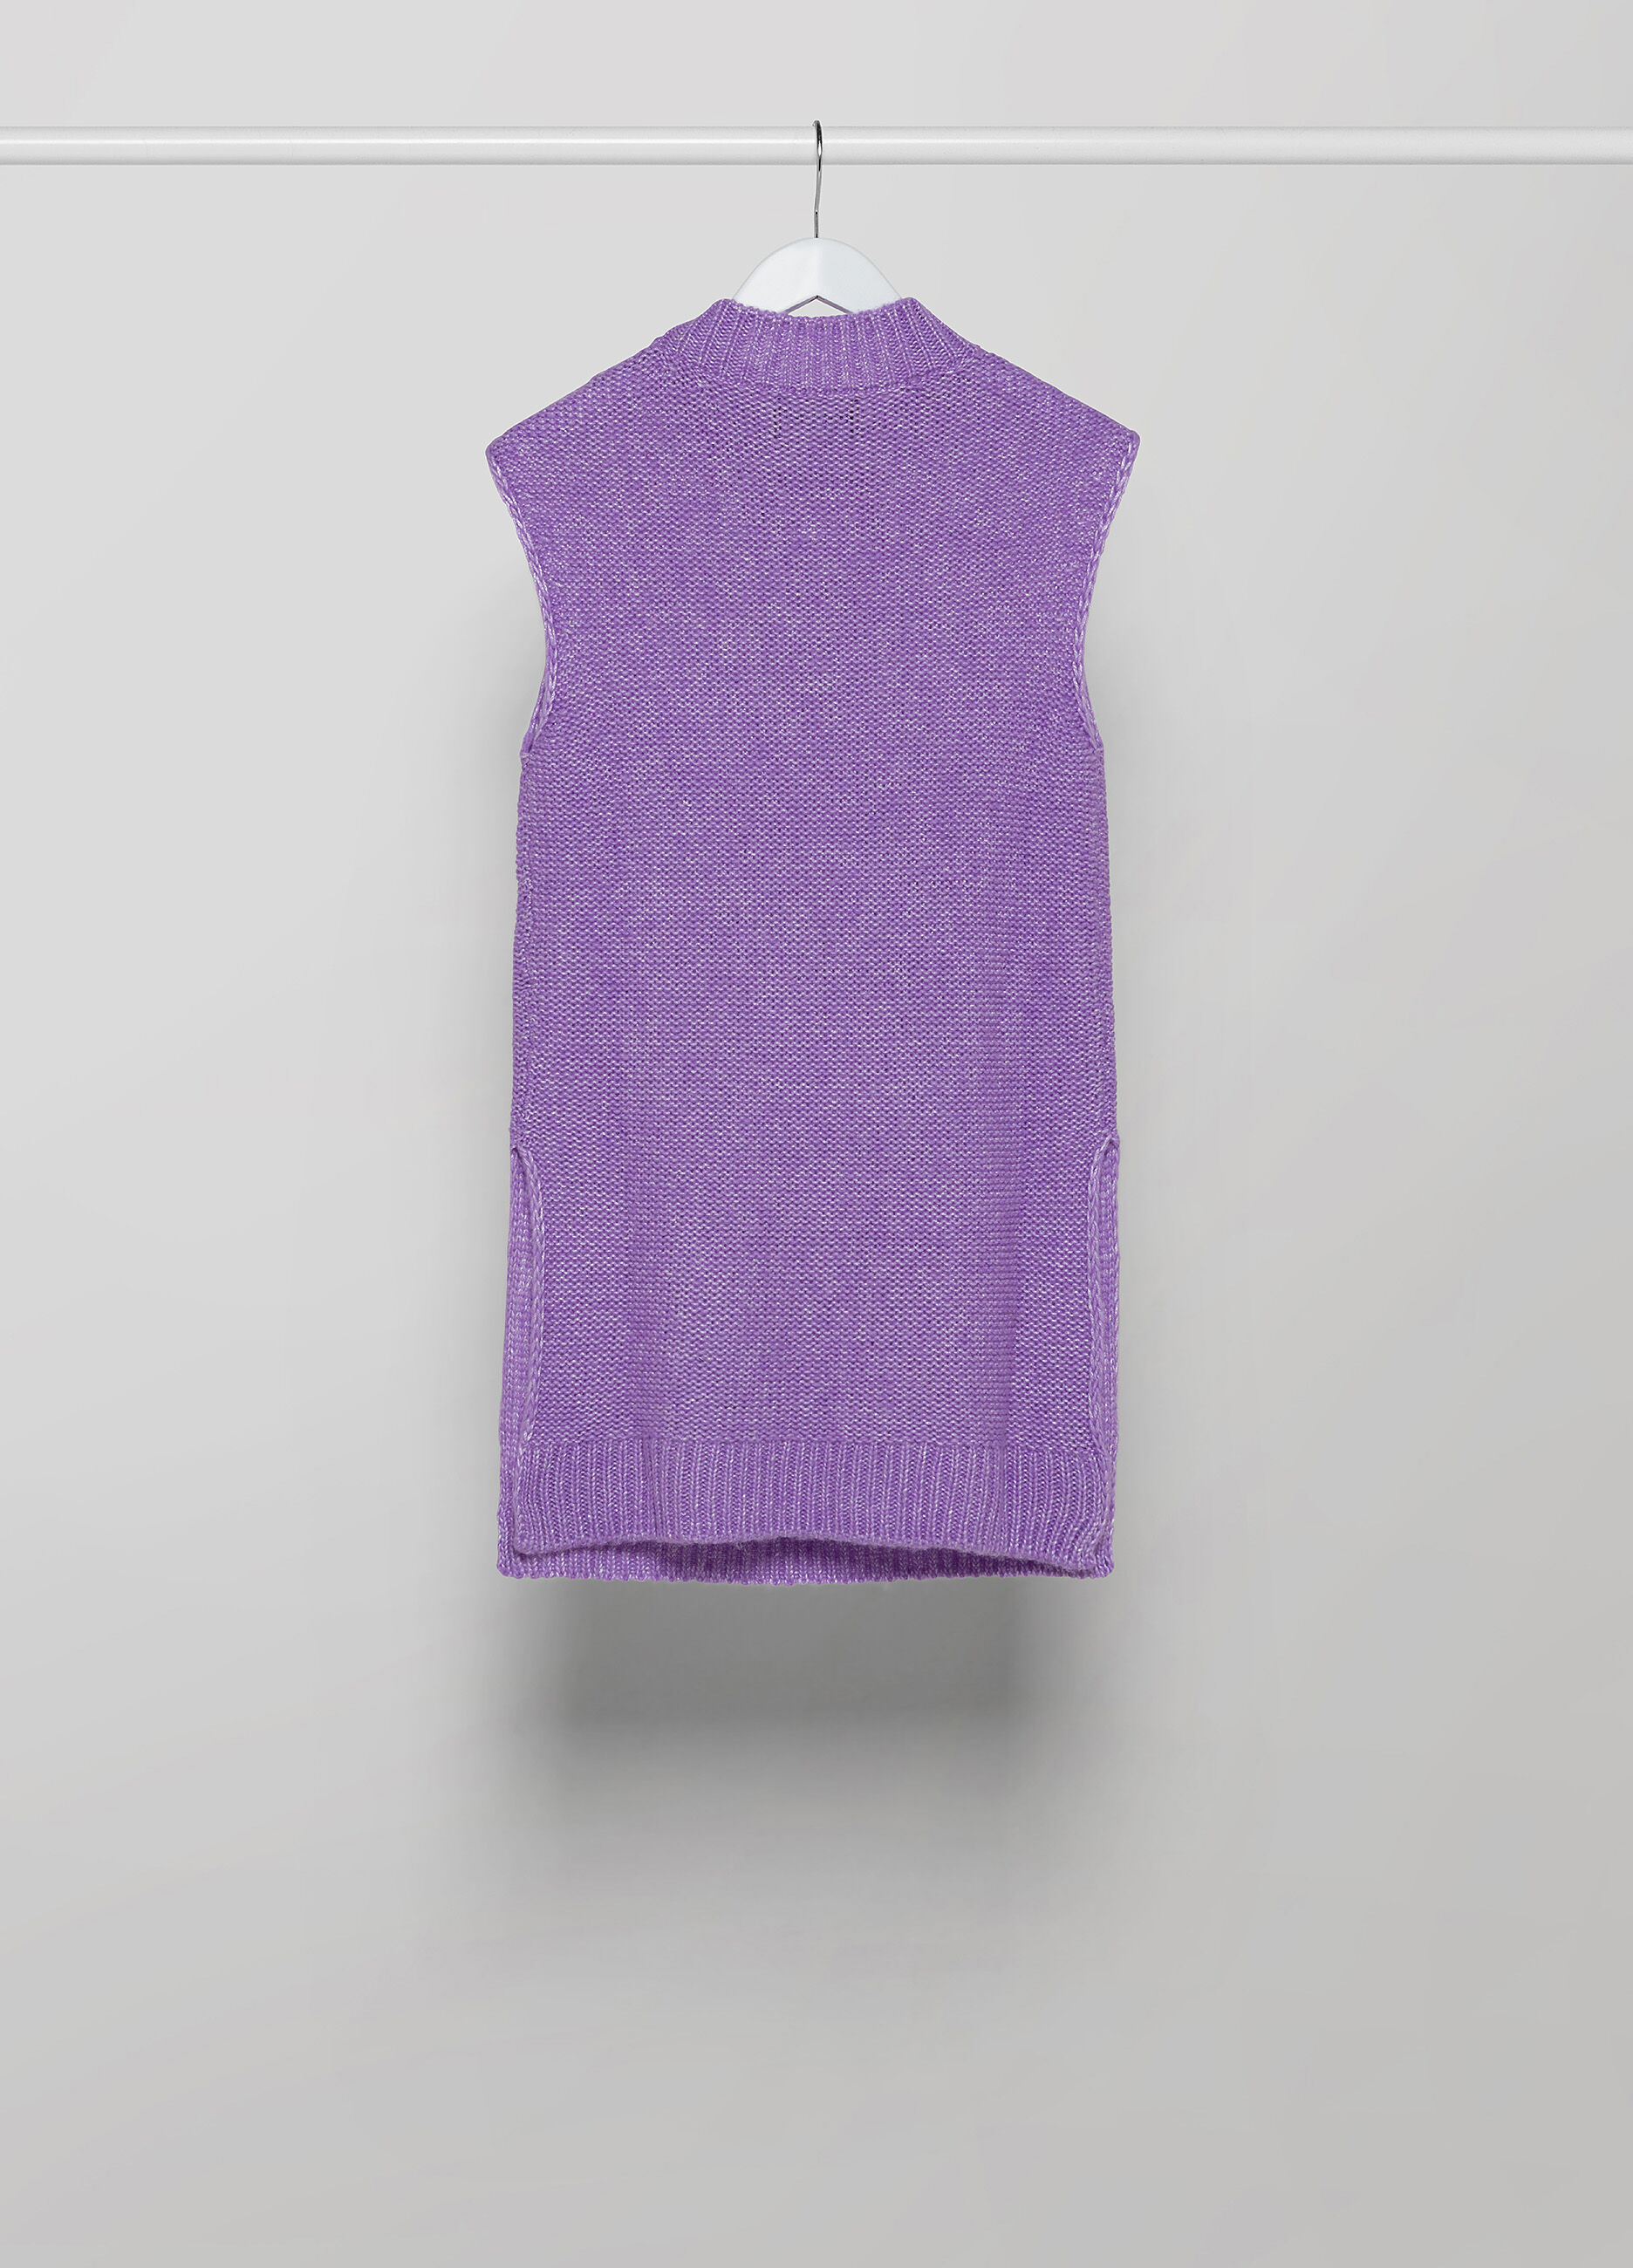 Sleeveless tricot in wool blend